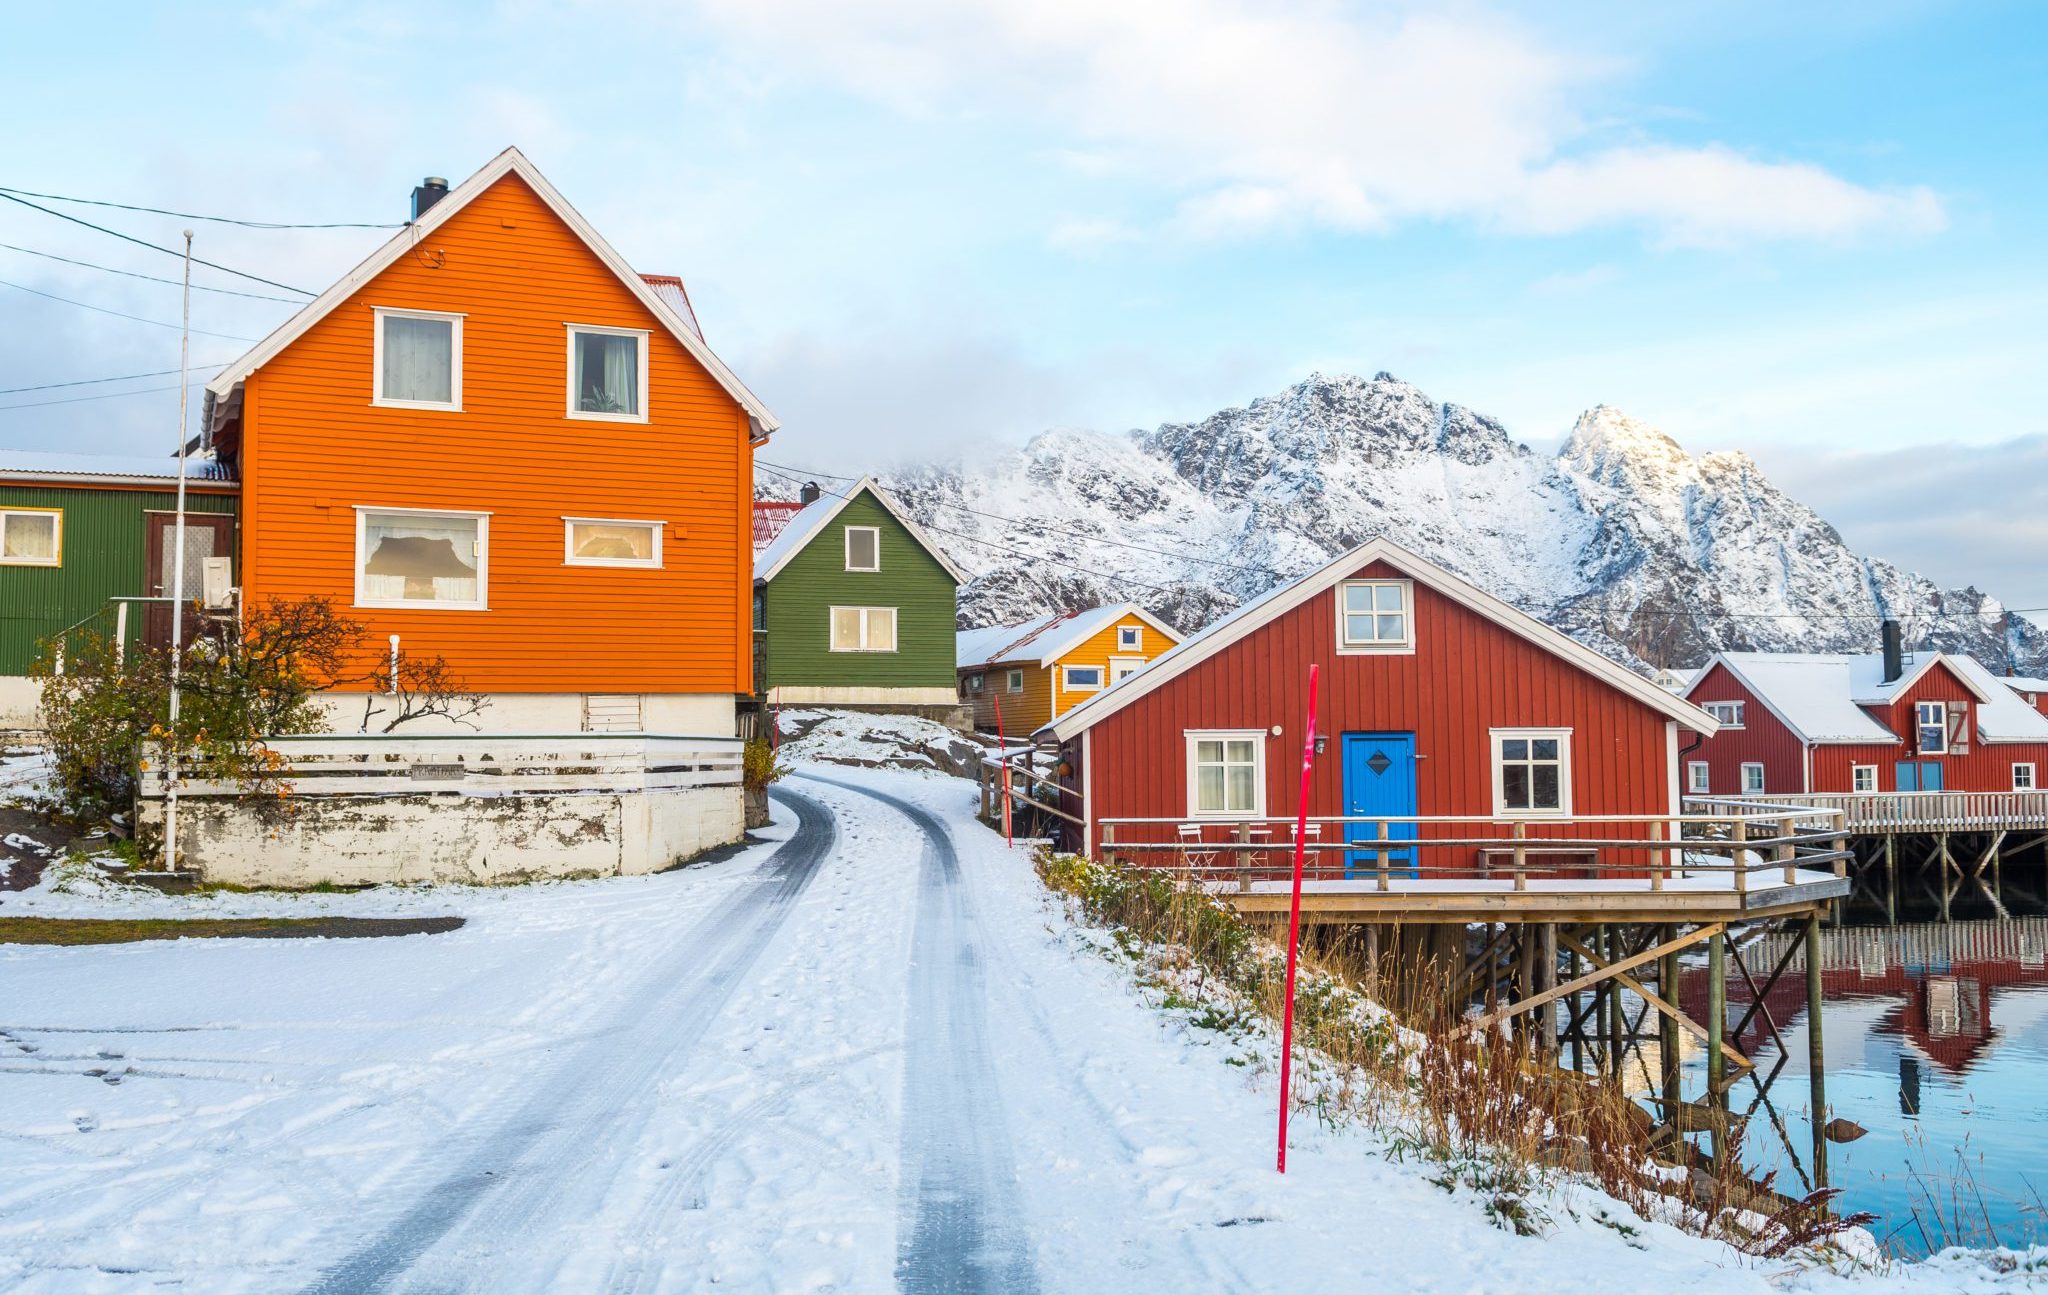 Traditional,Waterfront,Cottages,Lofoten,Islands,,Norway